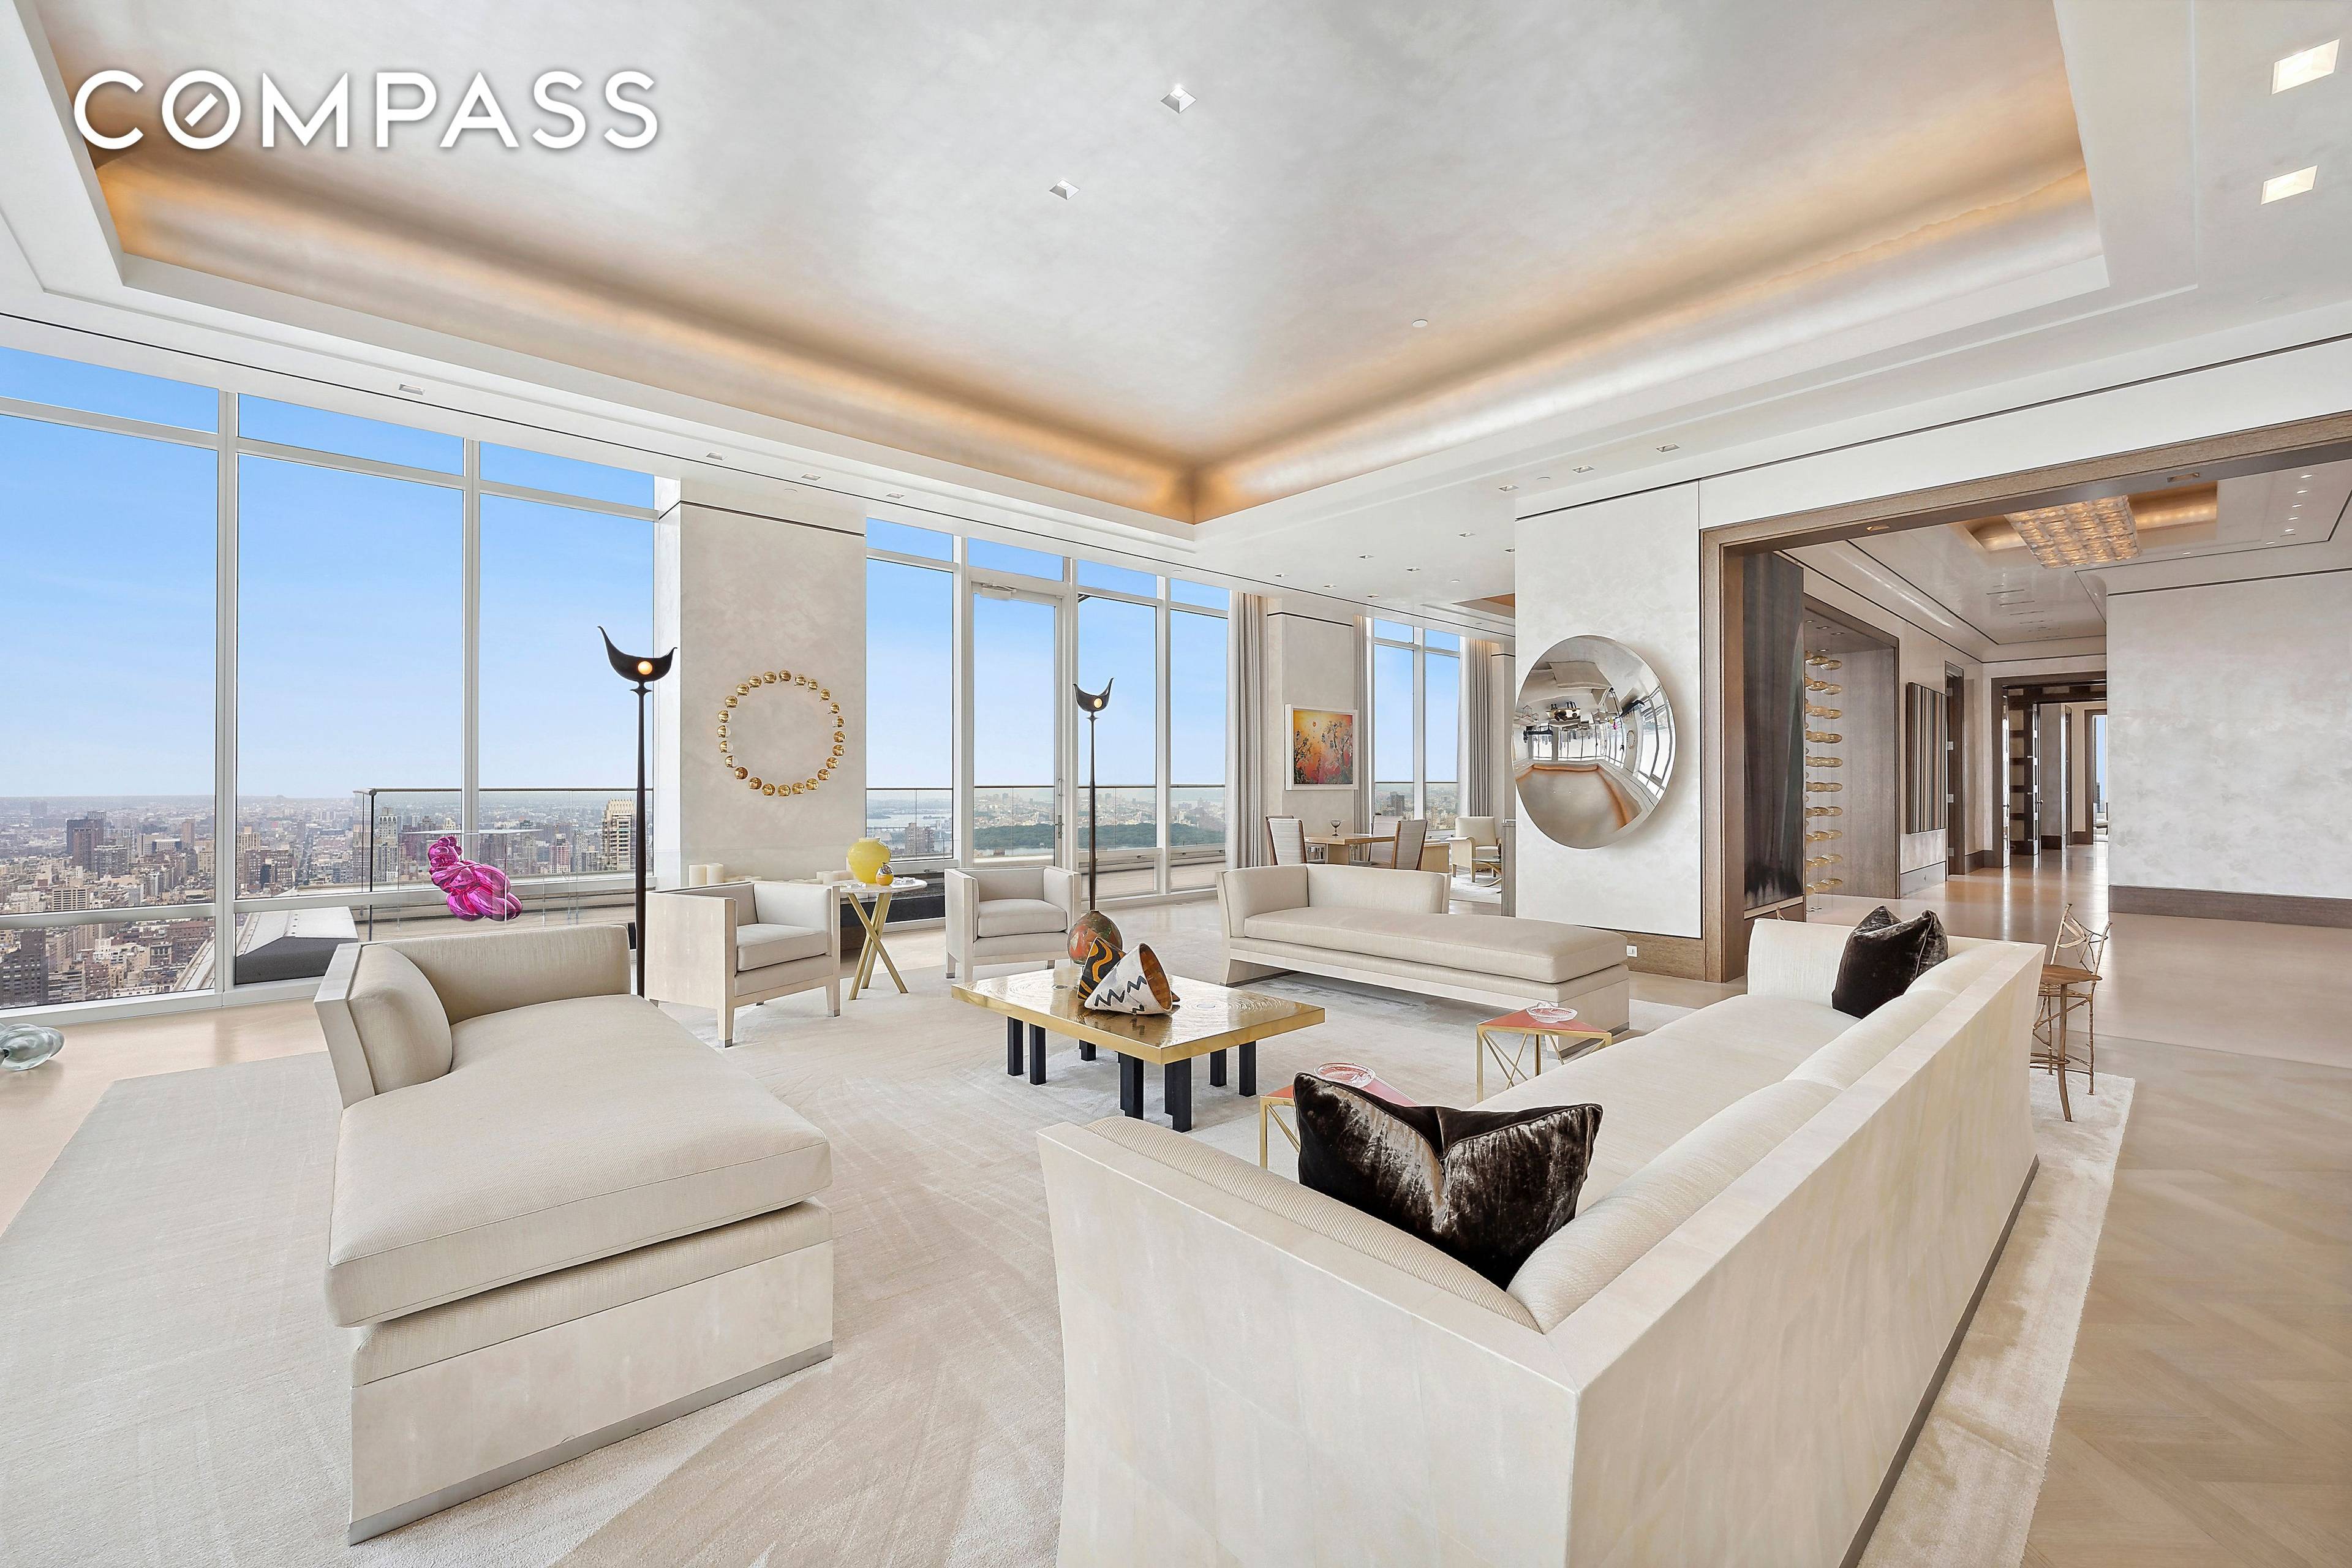 Welcome to the epitome of luxury living in this extraordinary uptown condominium residence with the grandest scale of any apartment on 1 floor over 9, 500 square feet plus incredible ...